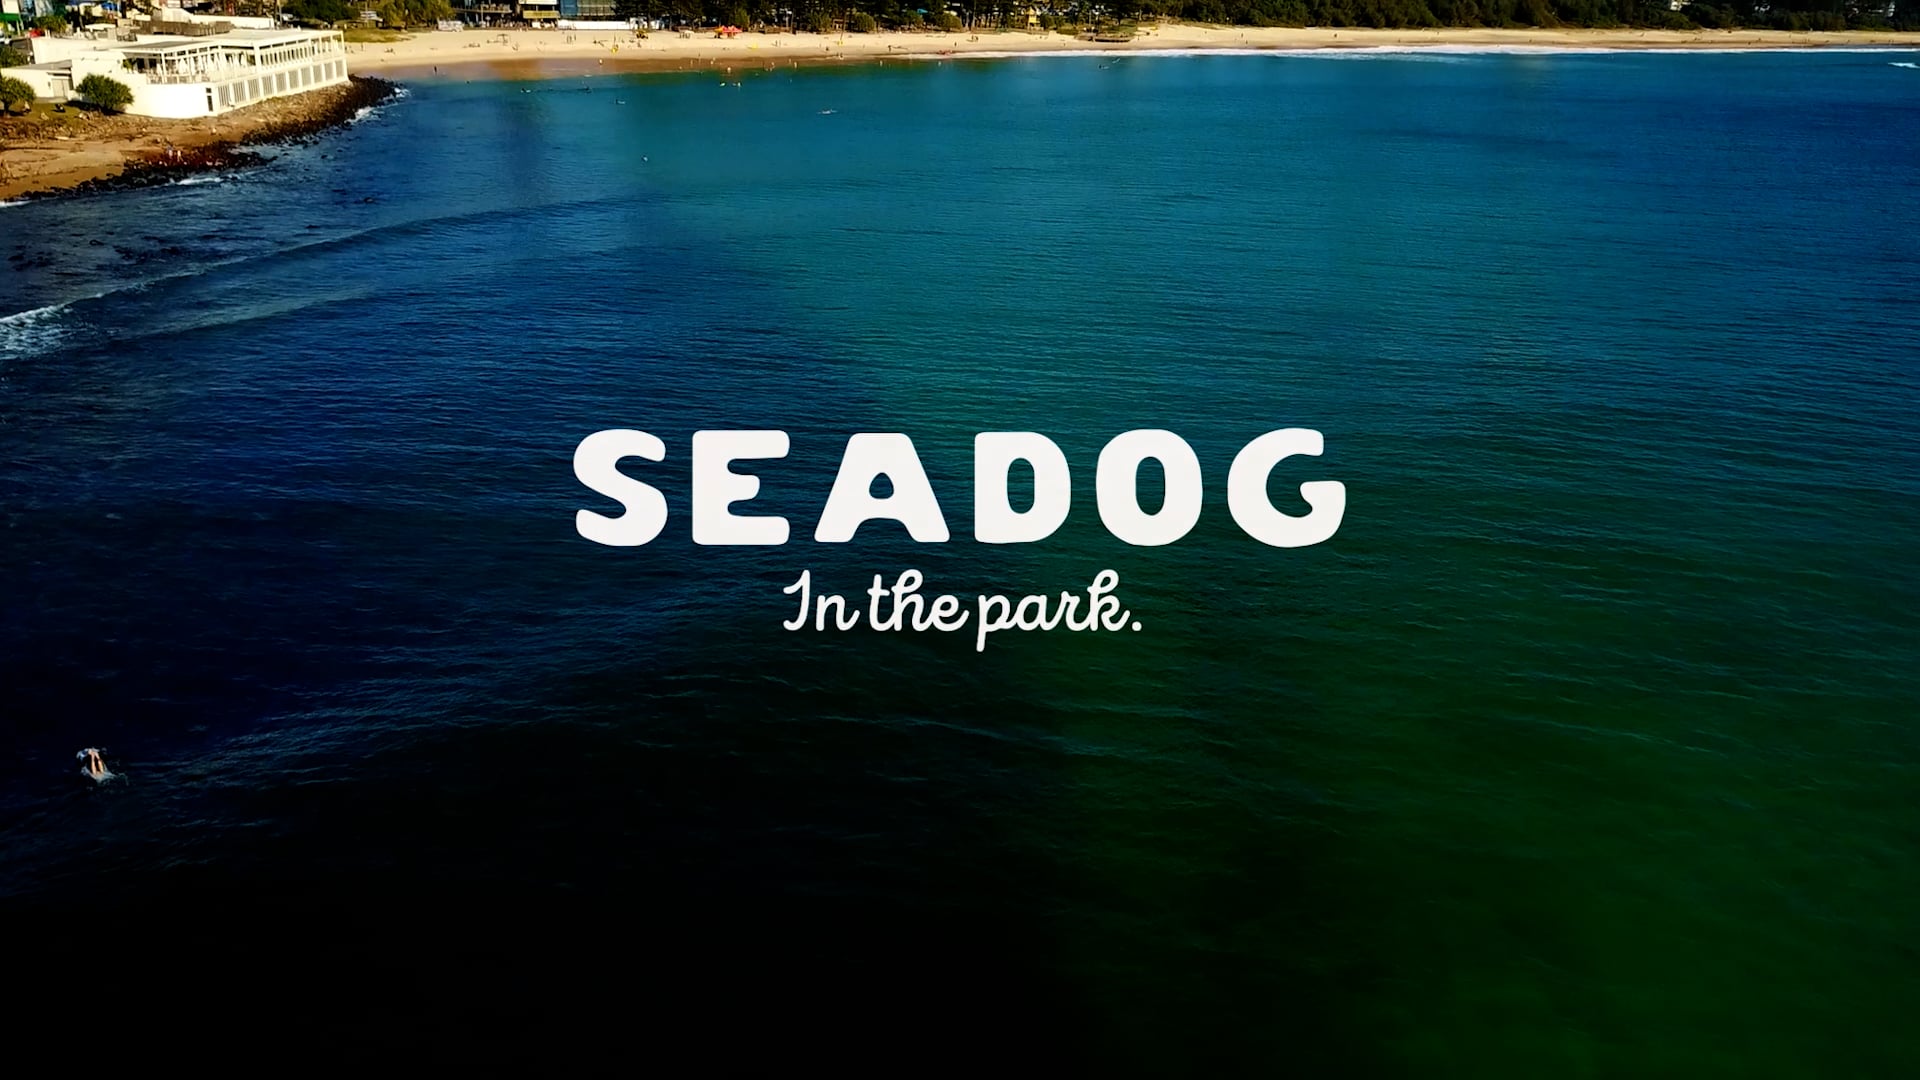 SEADOG IN THE PARK